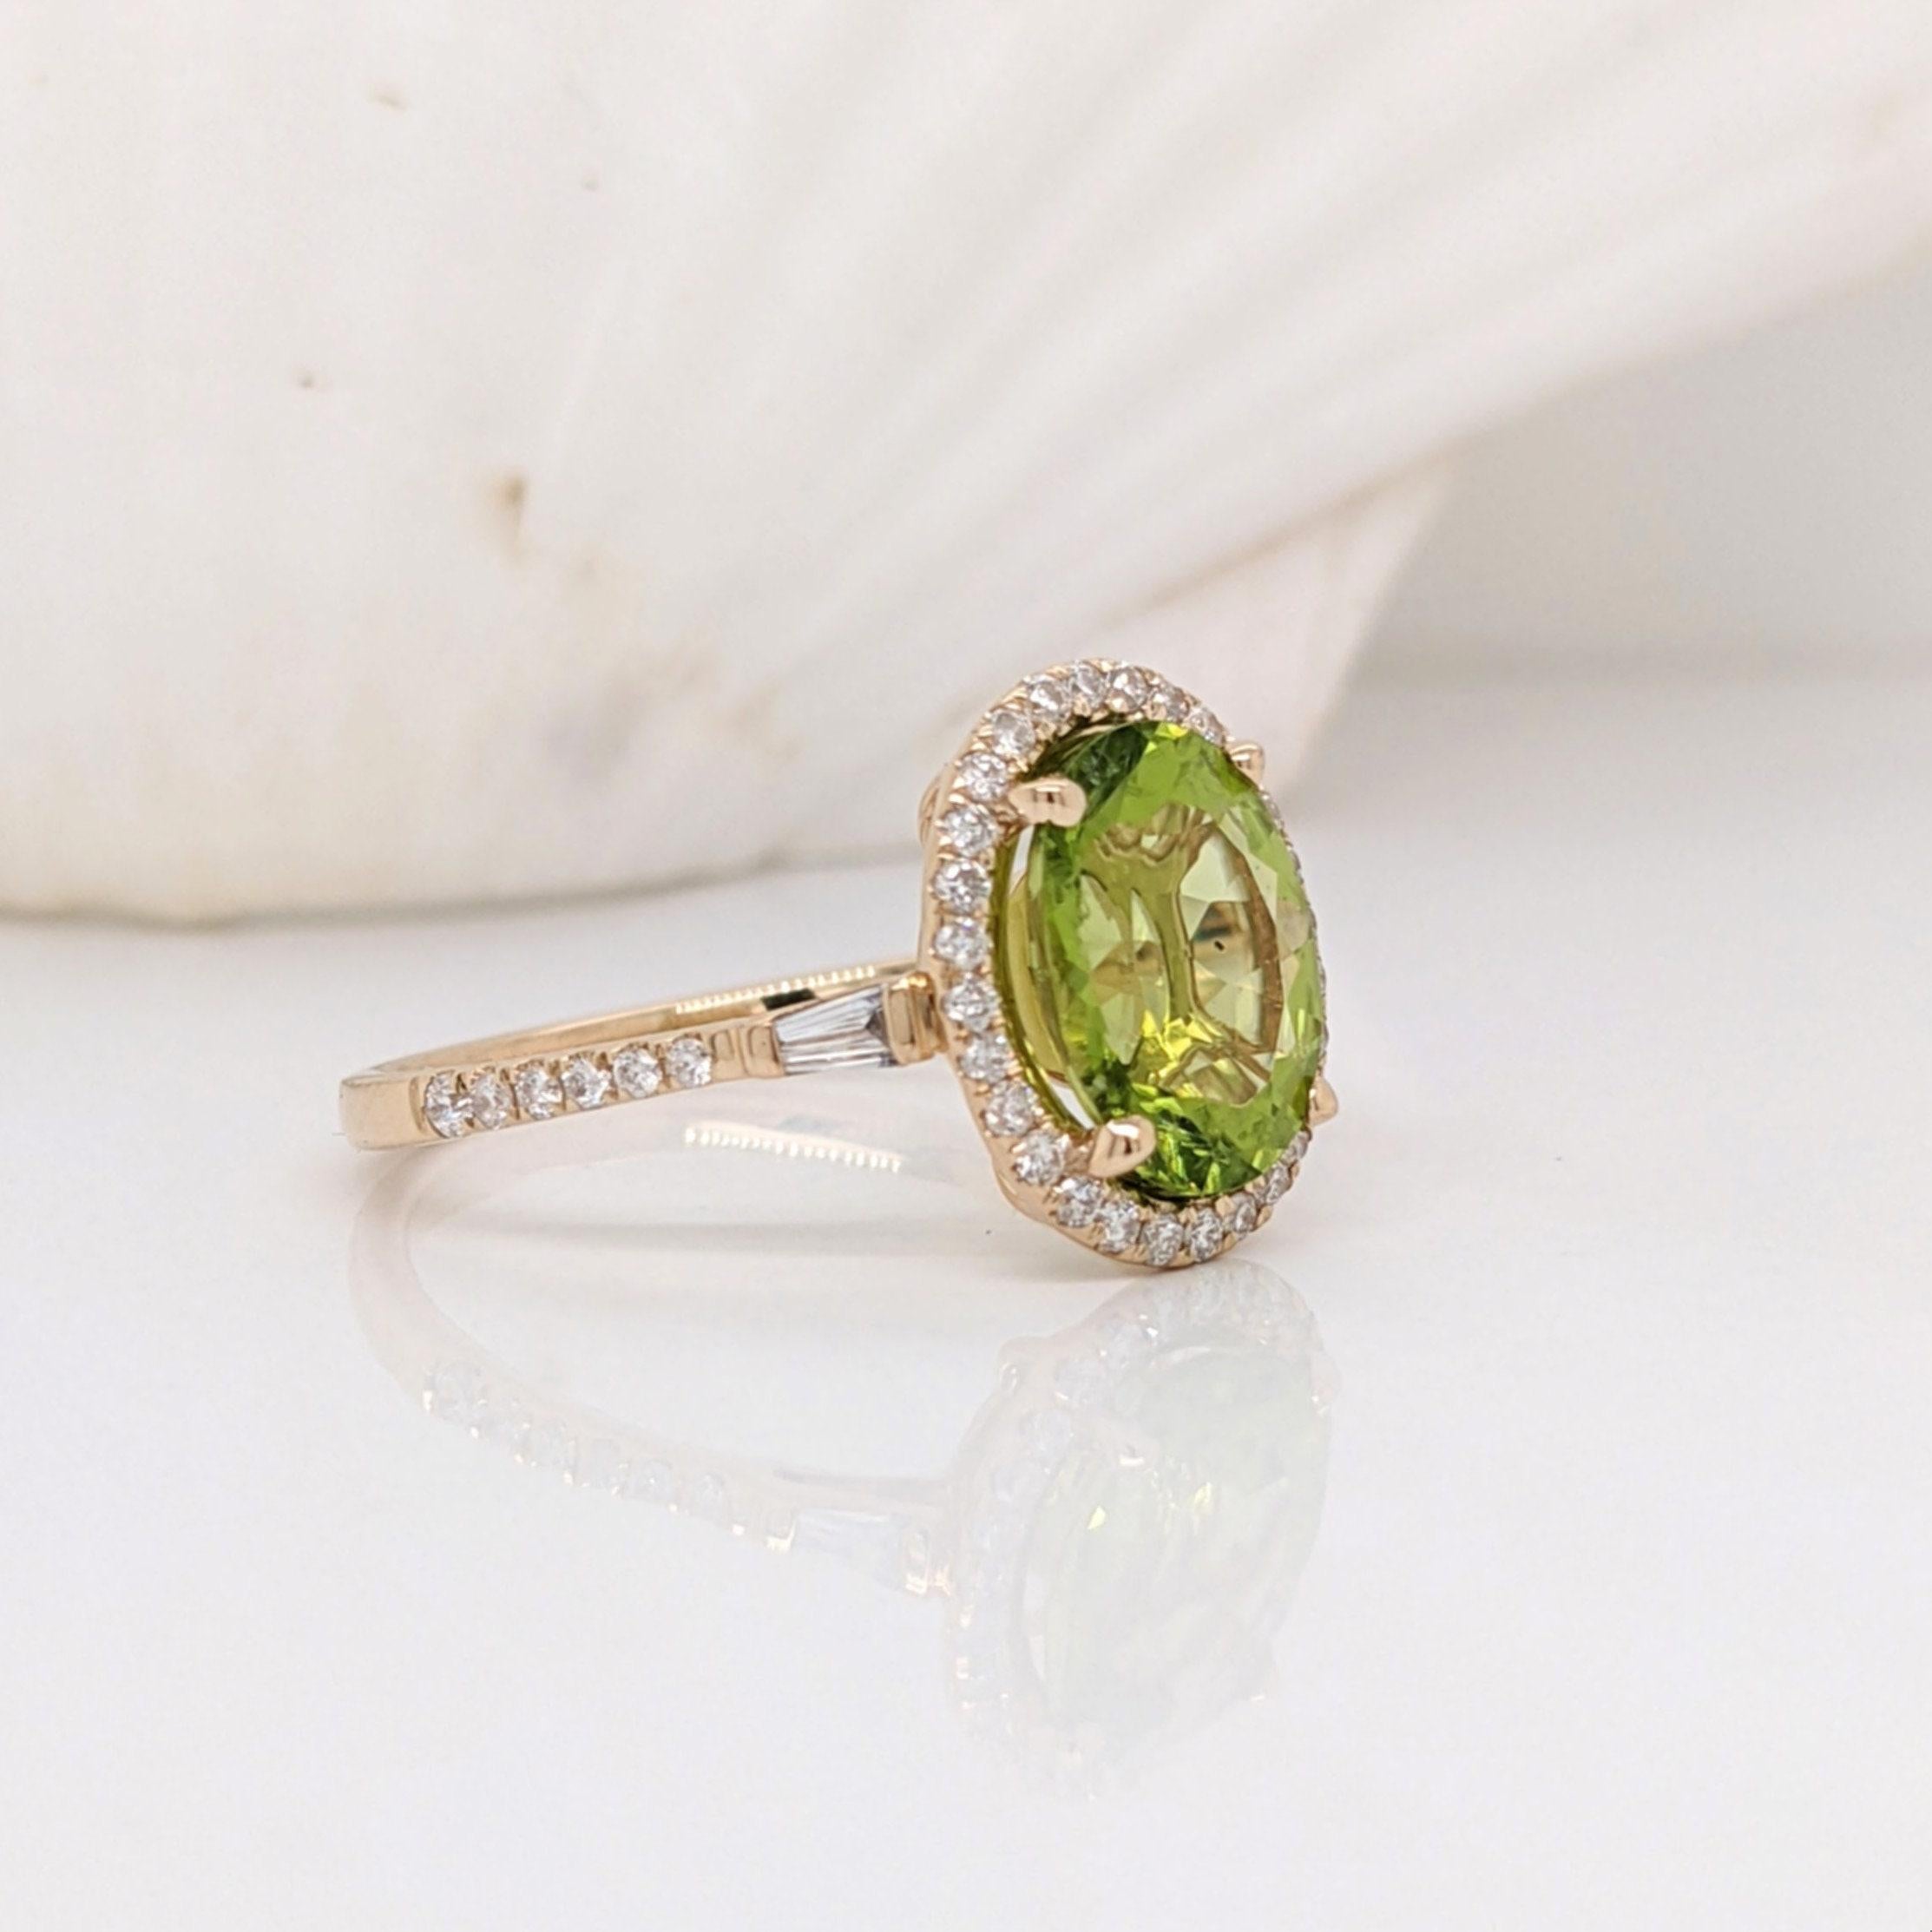 This beautiful ring features a 2.3 carat green peridot gemstone with natural earth mined diamonds all set in solid 14K gold. This ring makes a lovely august birthstone gift for your loved ones! 

Specifications

Item Type: Ring
Center